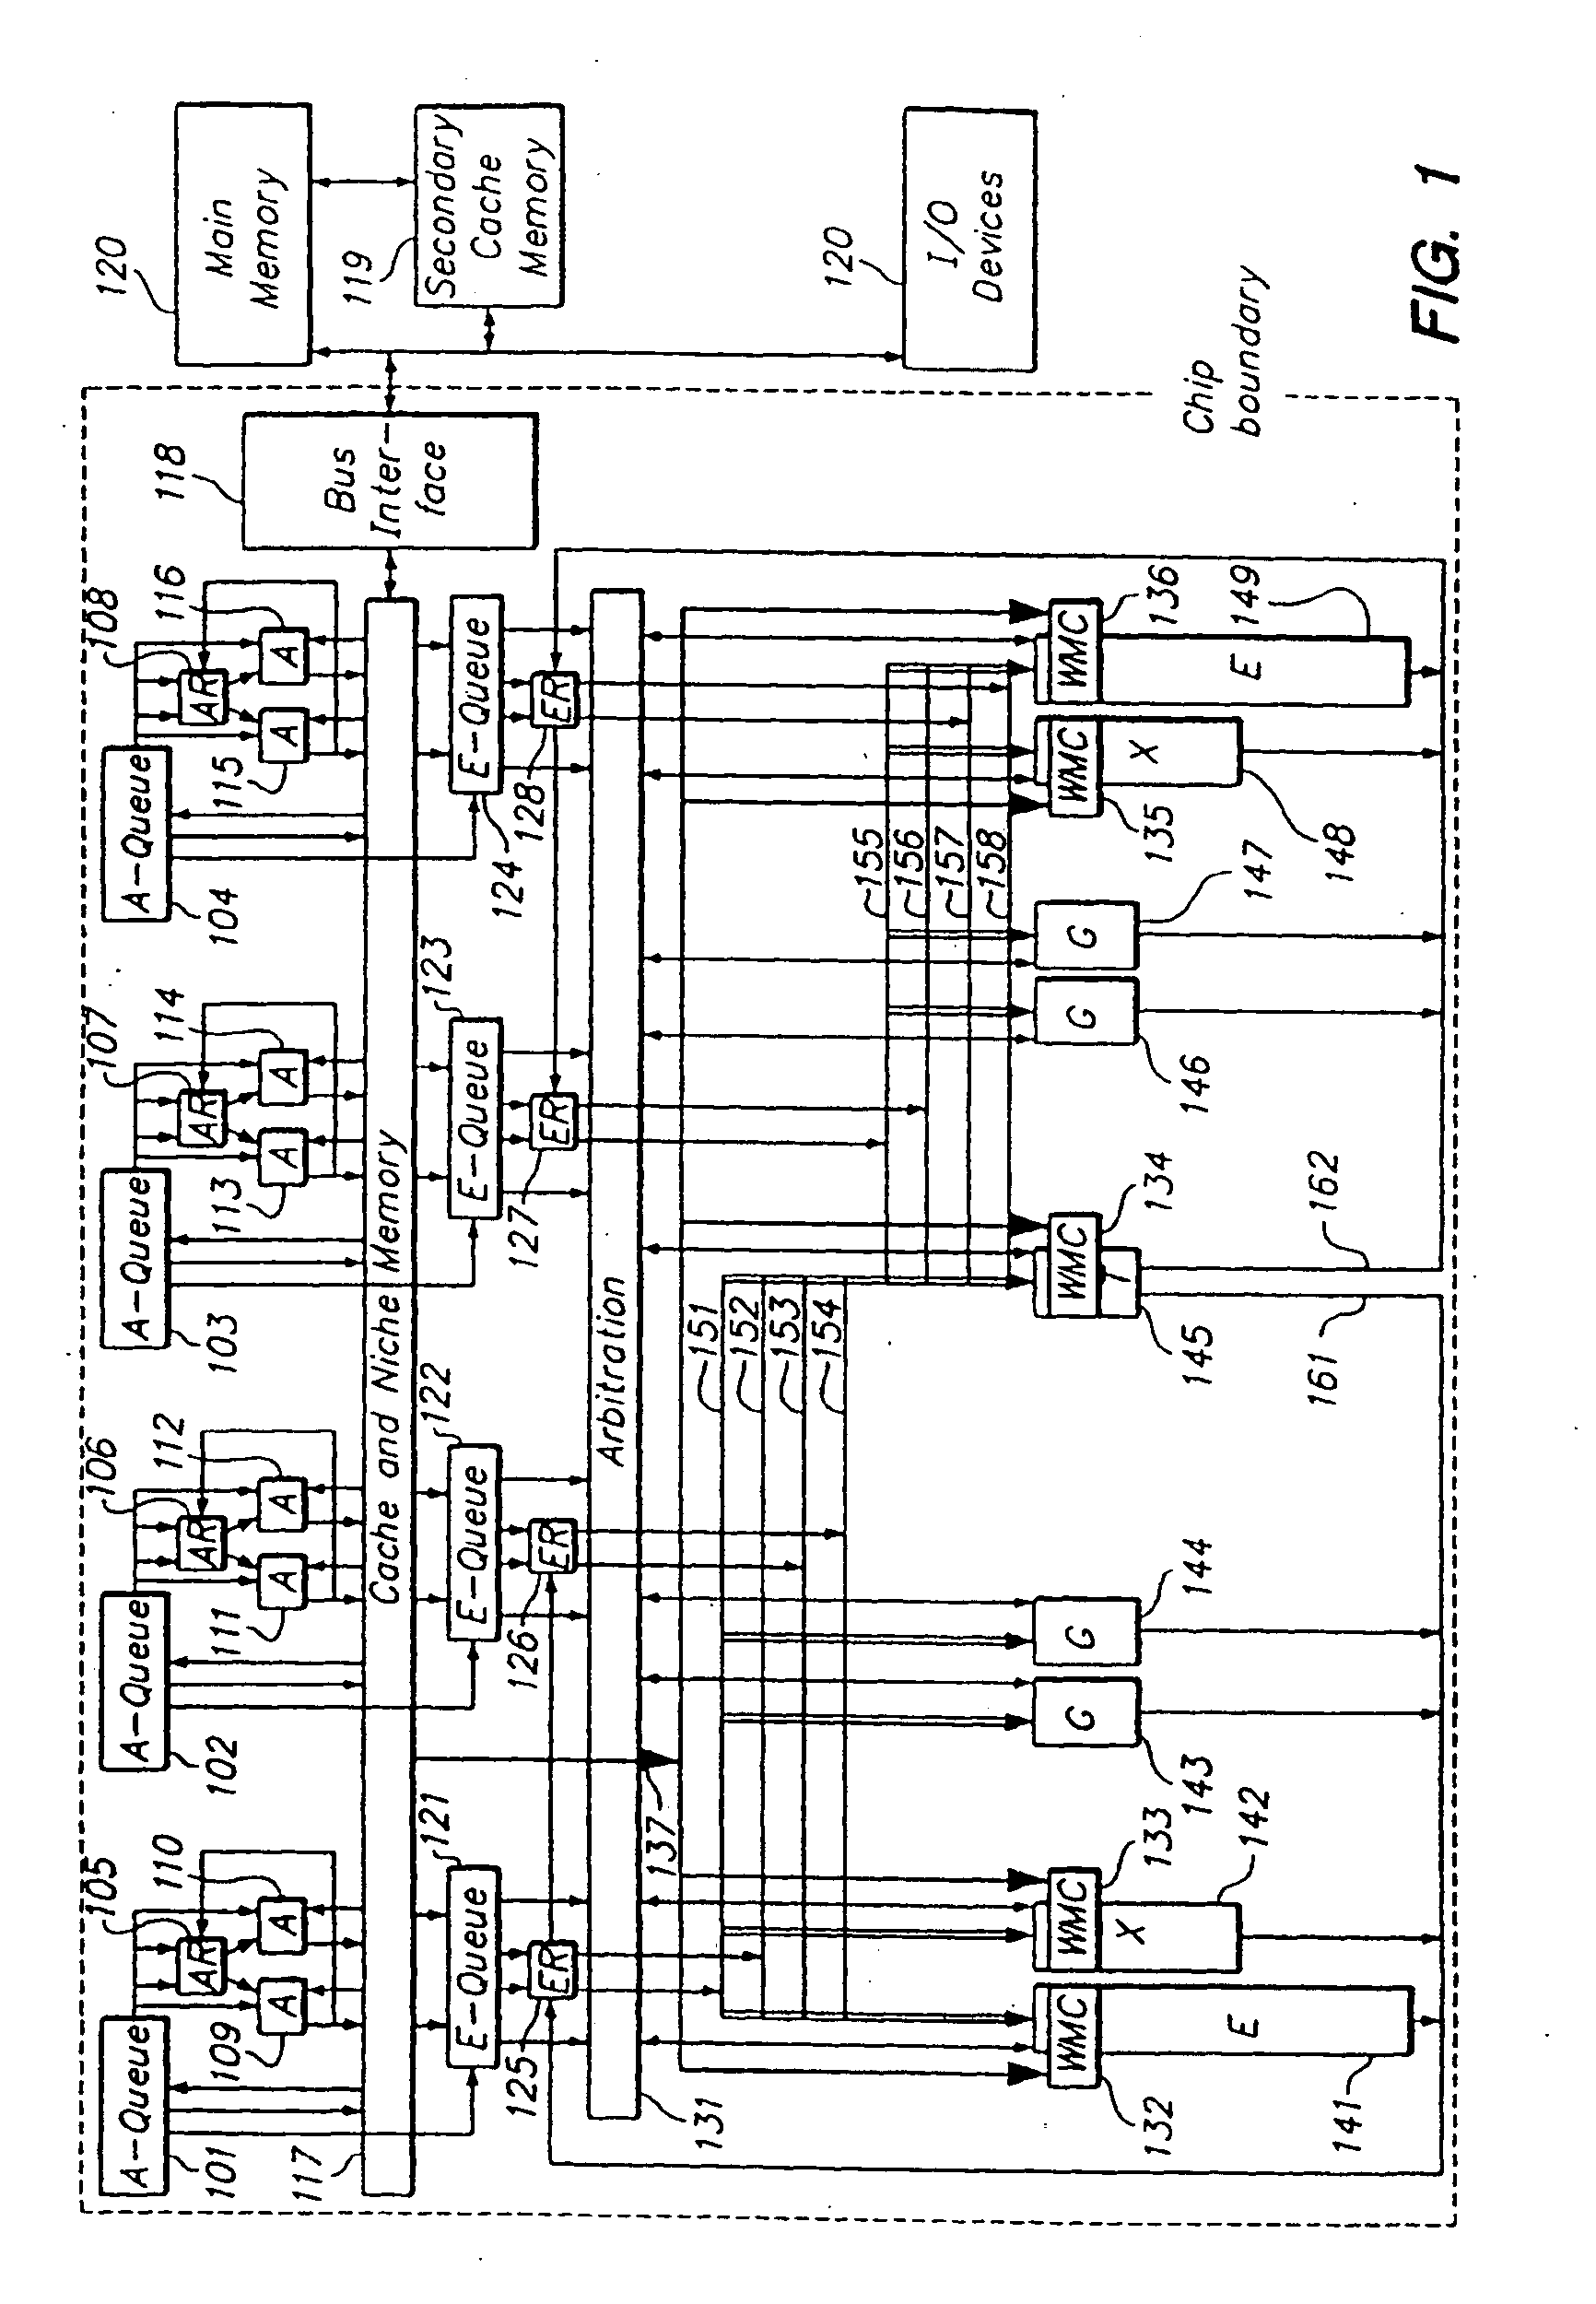 Processor architecture for executing transfers between wide operand memories